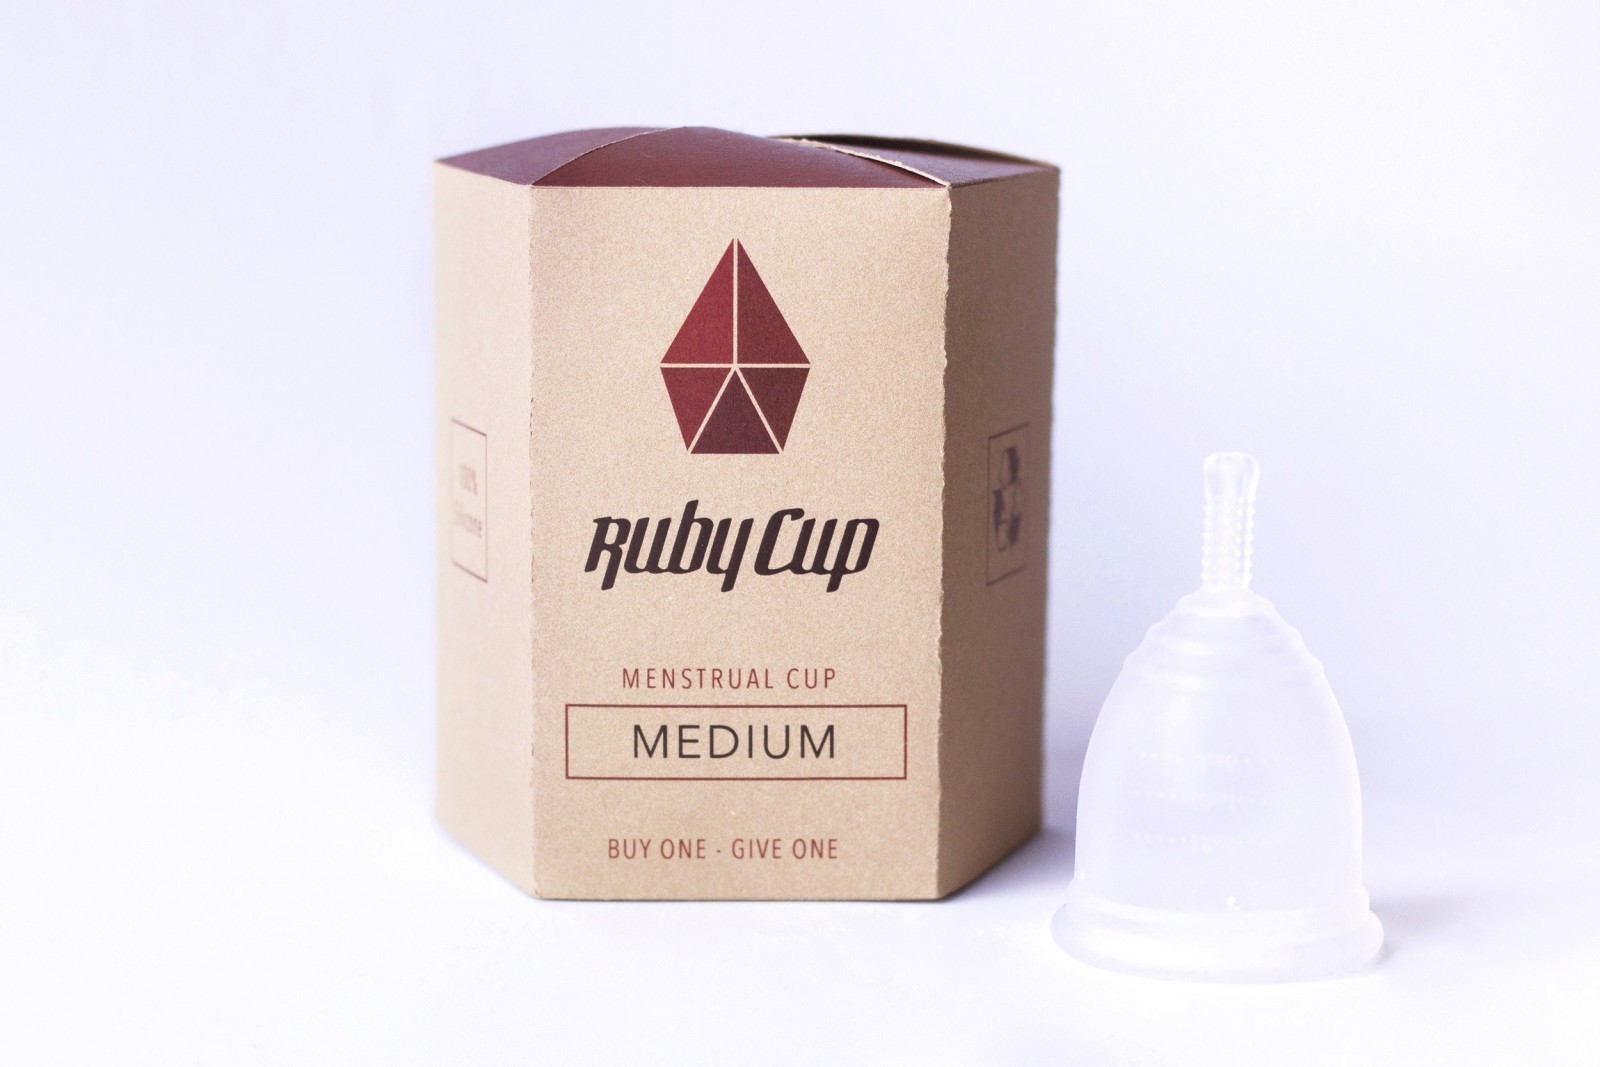 Hanna Petersson – Ruby Cup / Recyclable Packaging (Student)